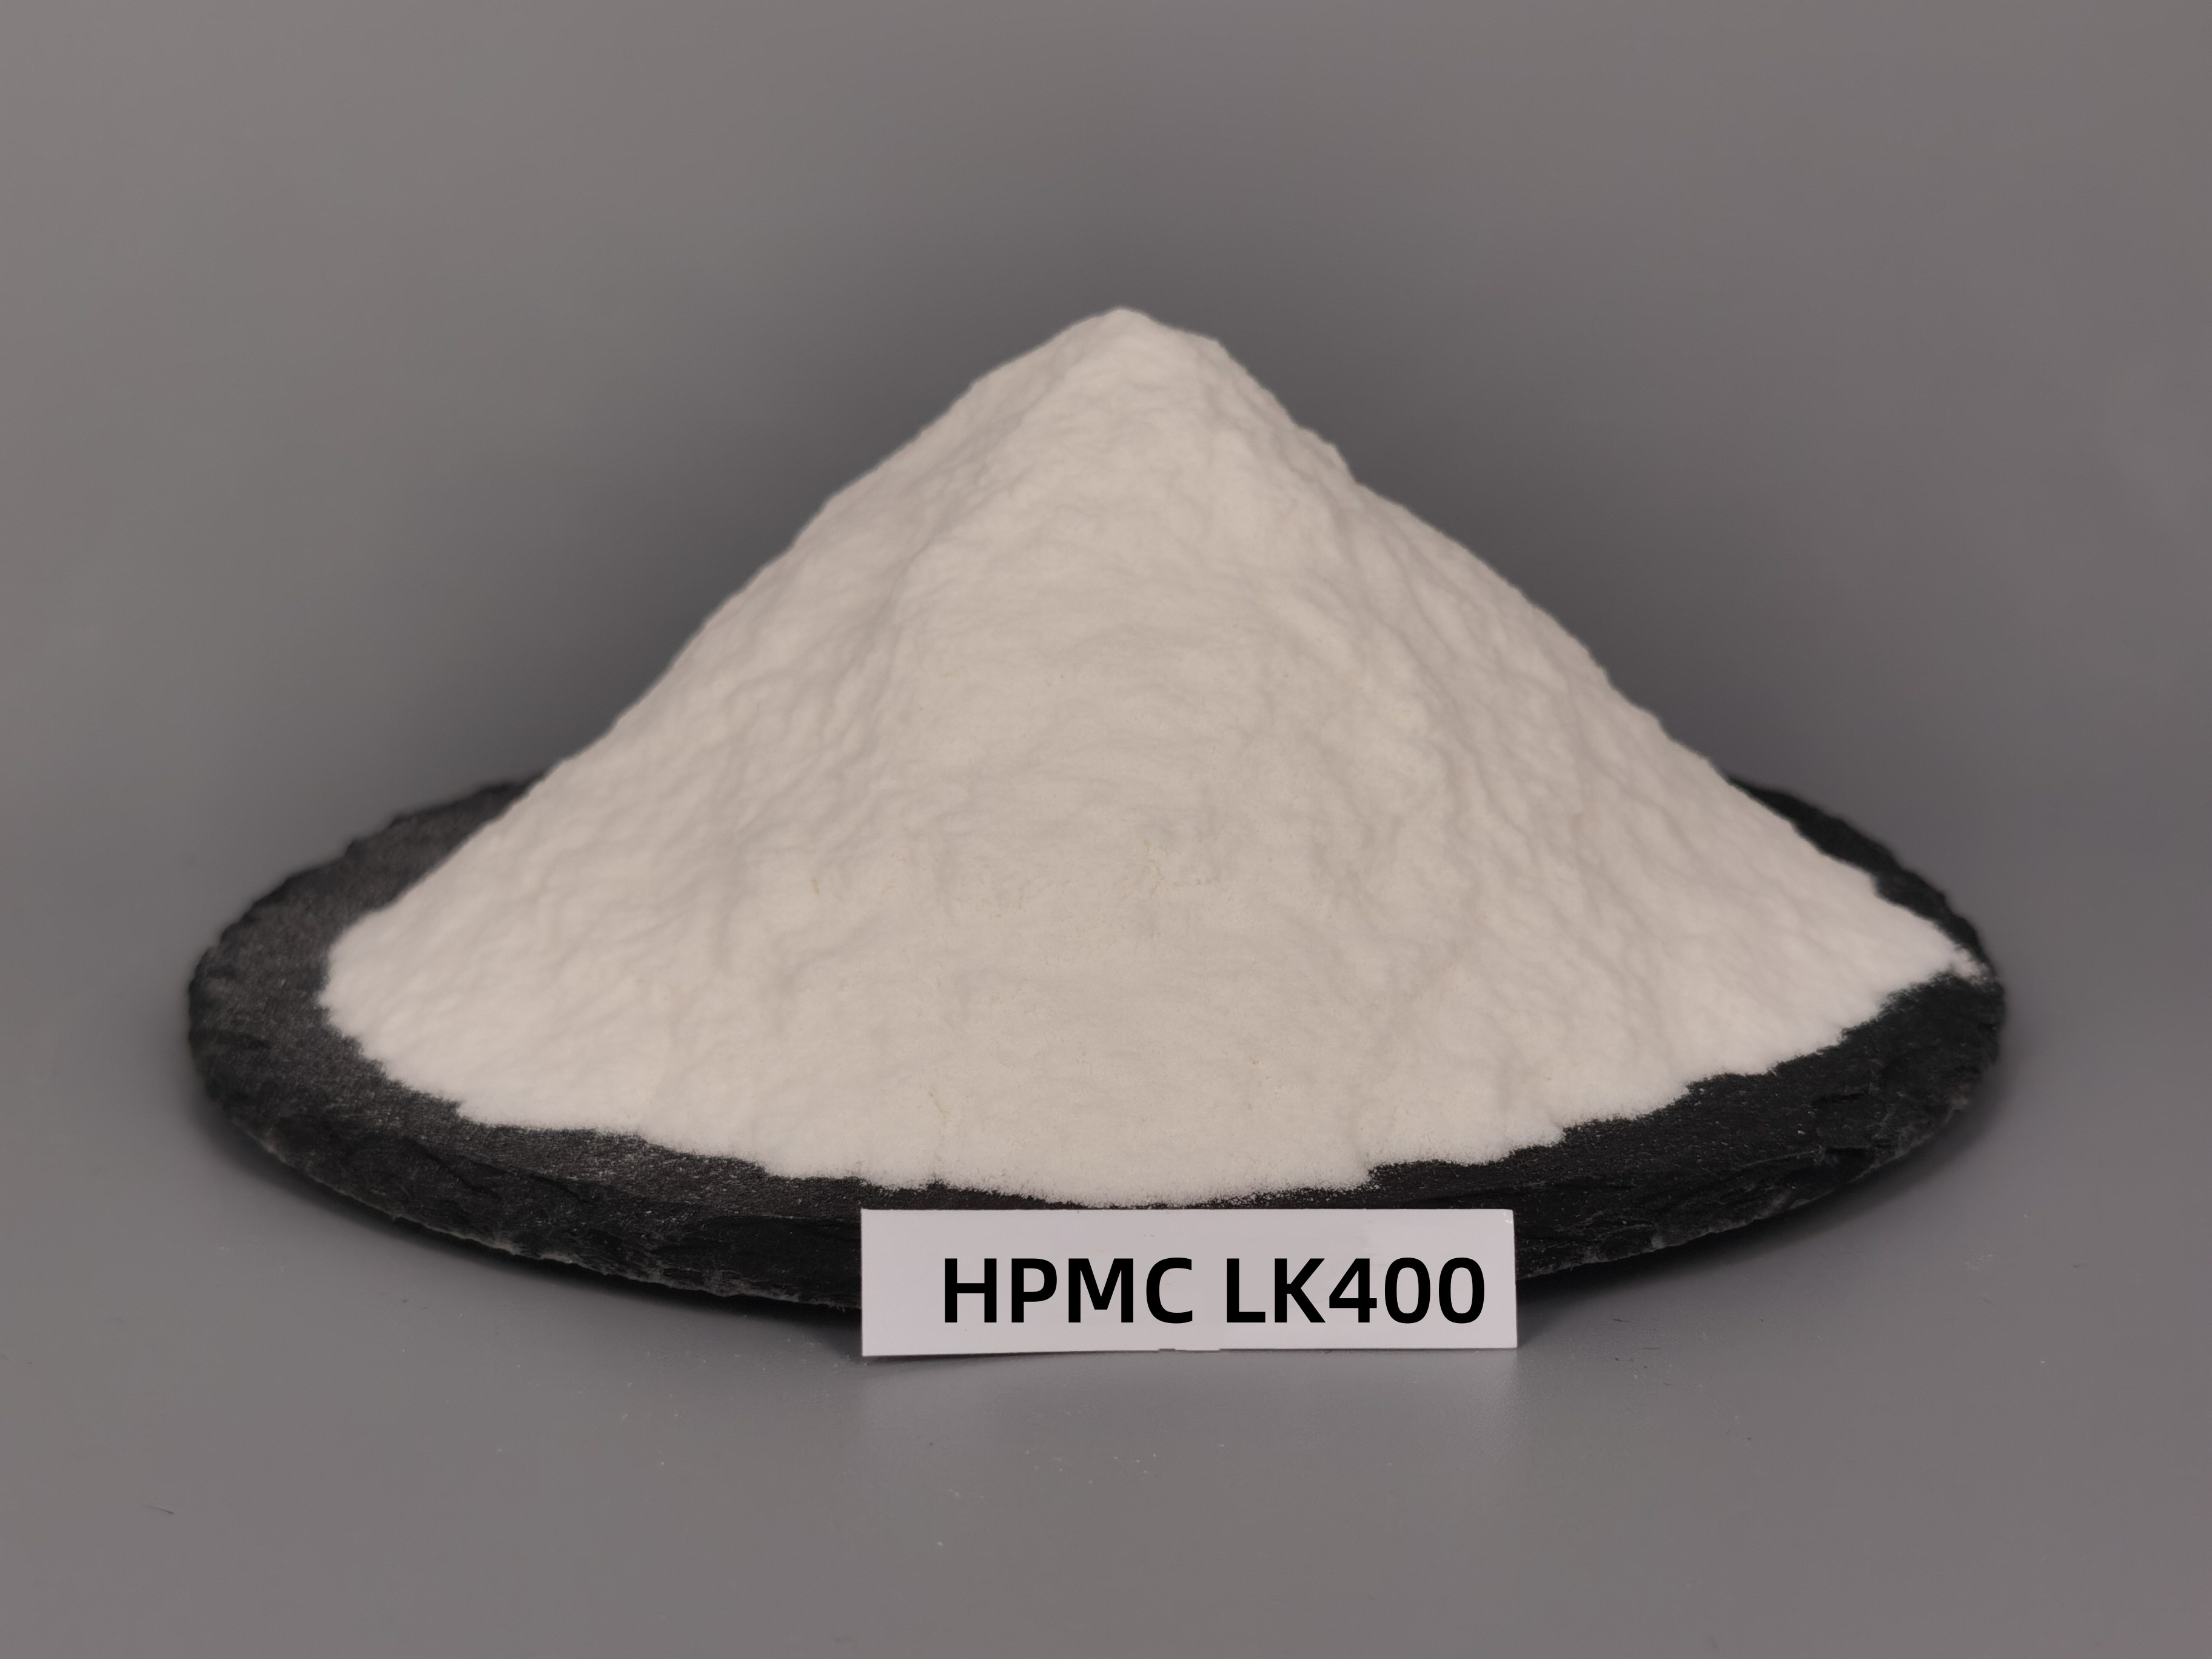 Cellulose ether is a versatile material that has found applications in various industries, ranging from construction and pharmaceuticals to food and cosmetics. This article aims to provide an intro...